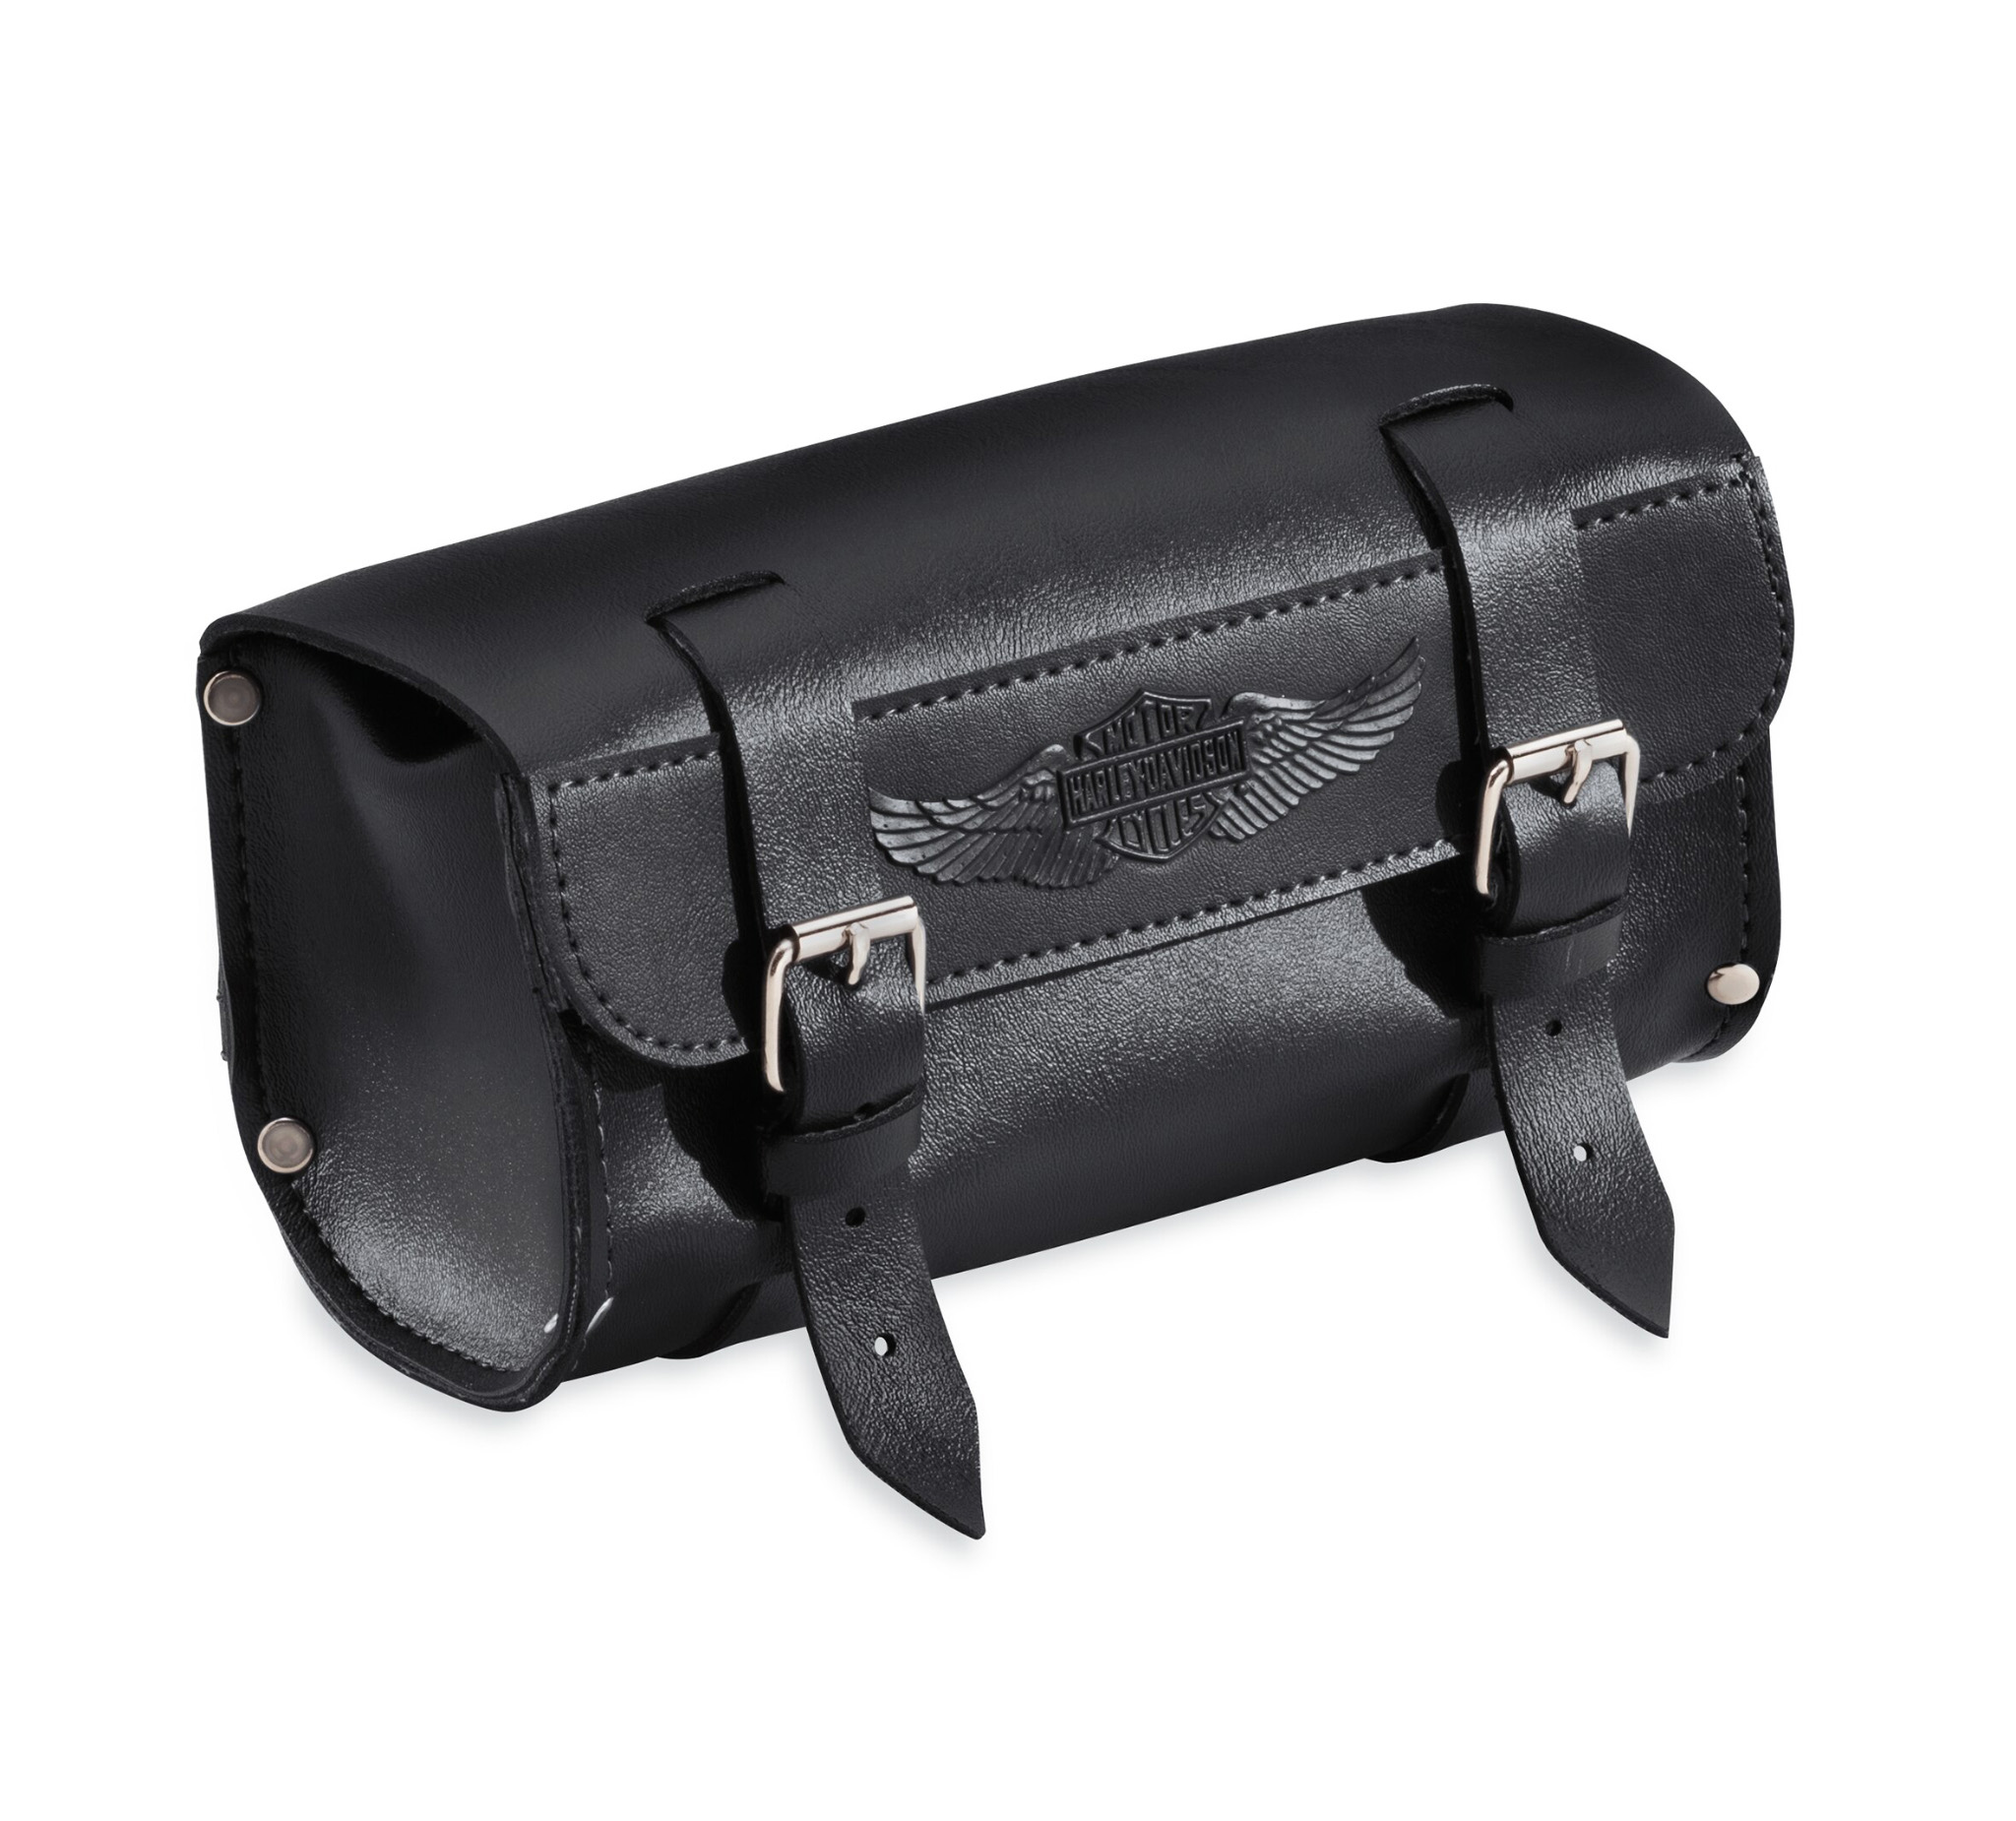 Cred Small Travel Bag Price in India, Full Specifications & Offers